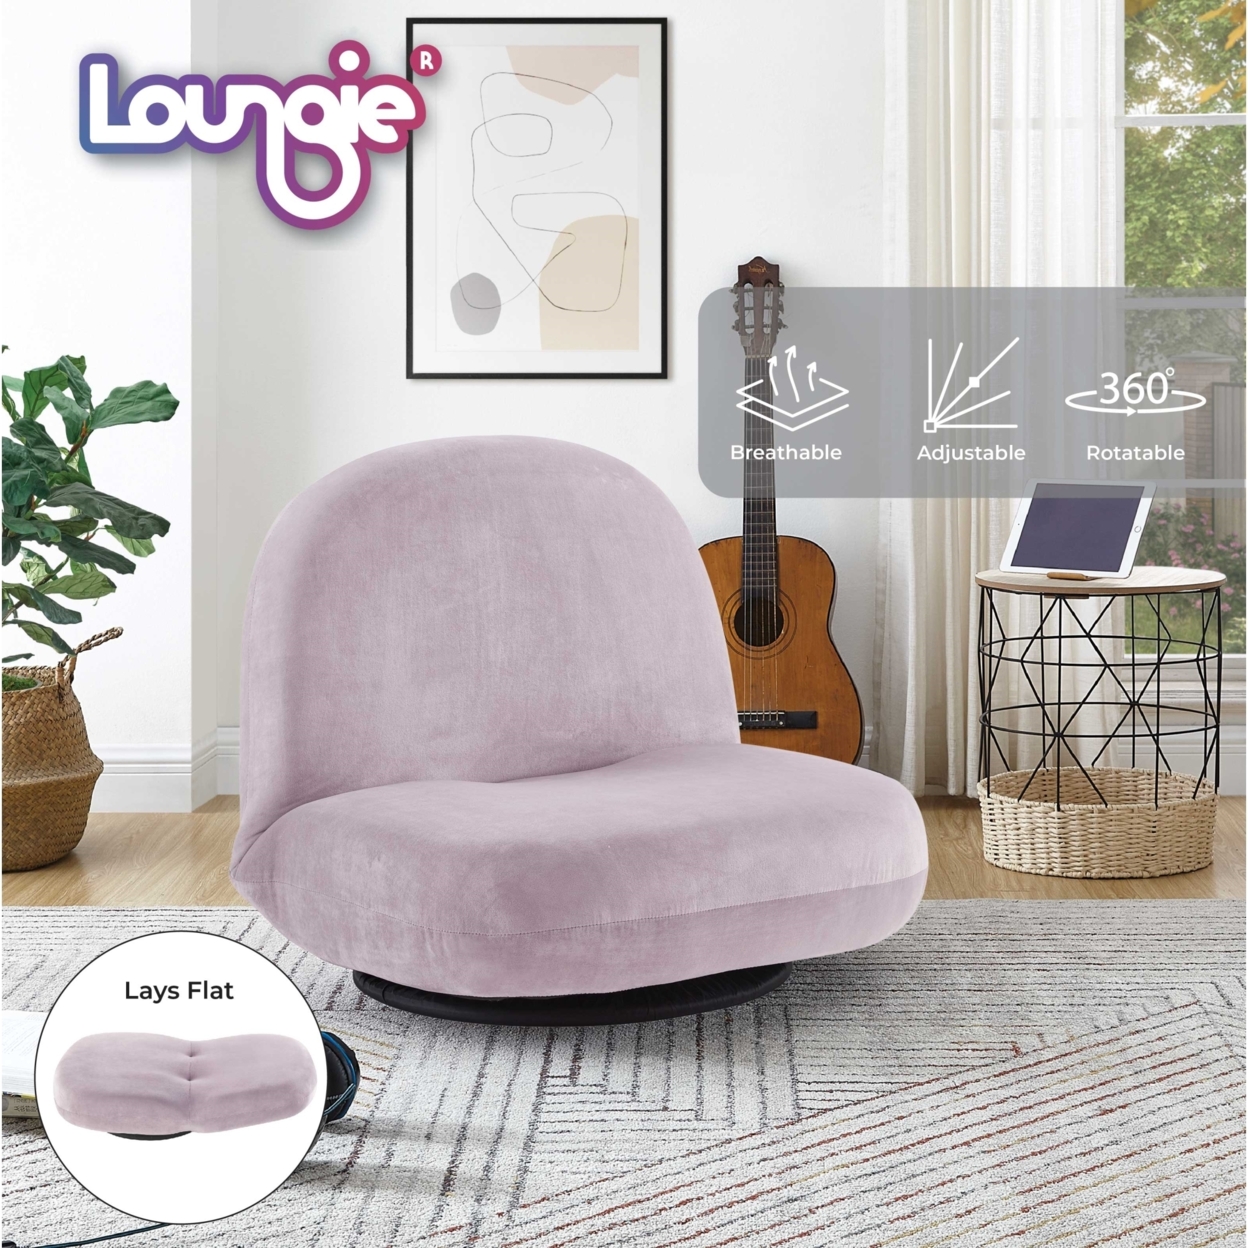 Mckenzi Chair - 5 Adjustable Positions, 360 Swivel, Reclines To Flat, Washable Cover, Steel Rod Construction - Lavender